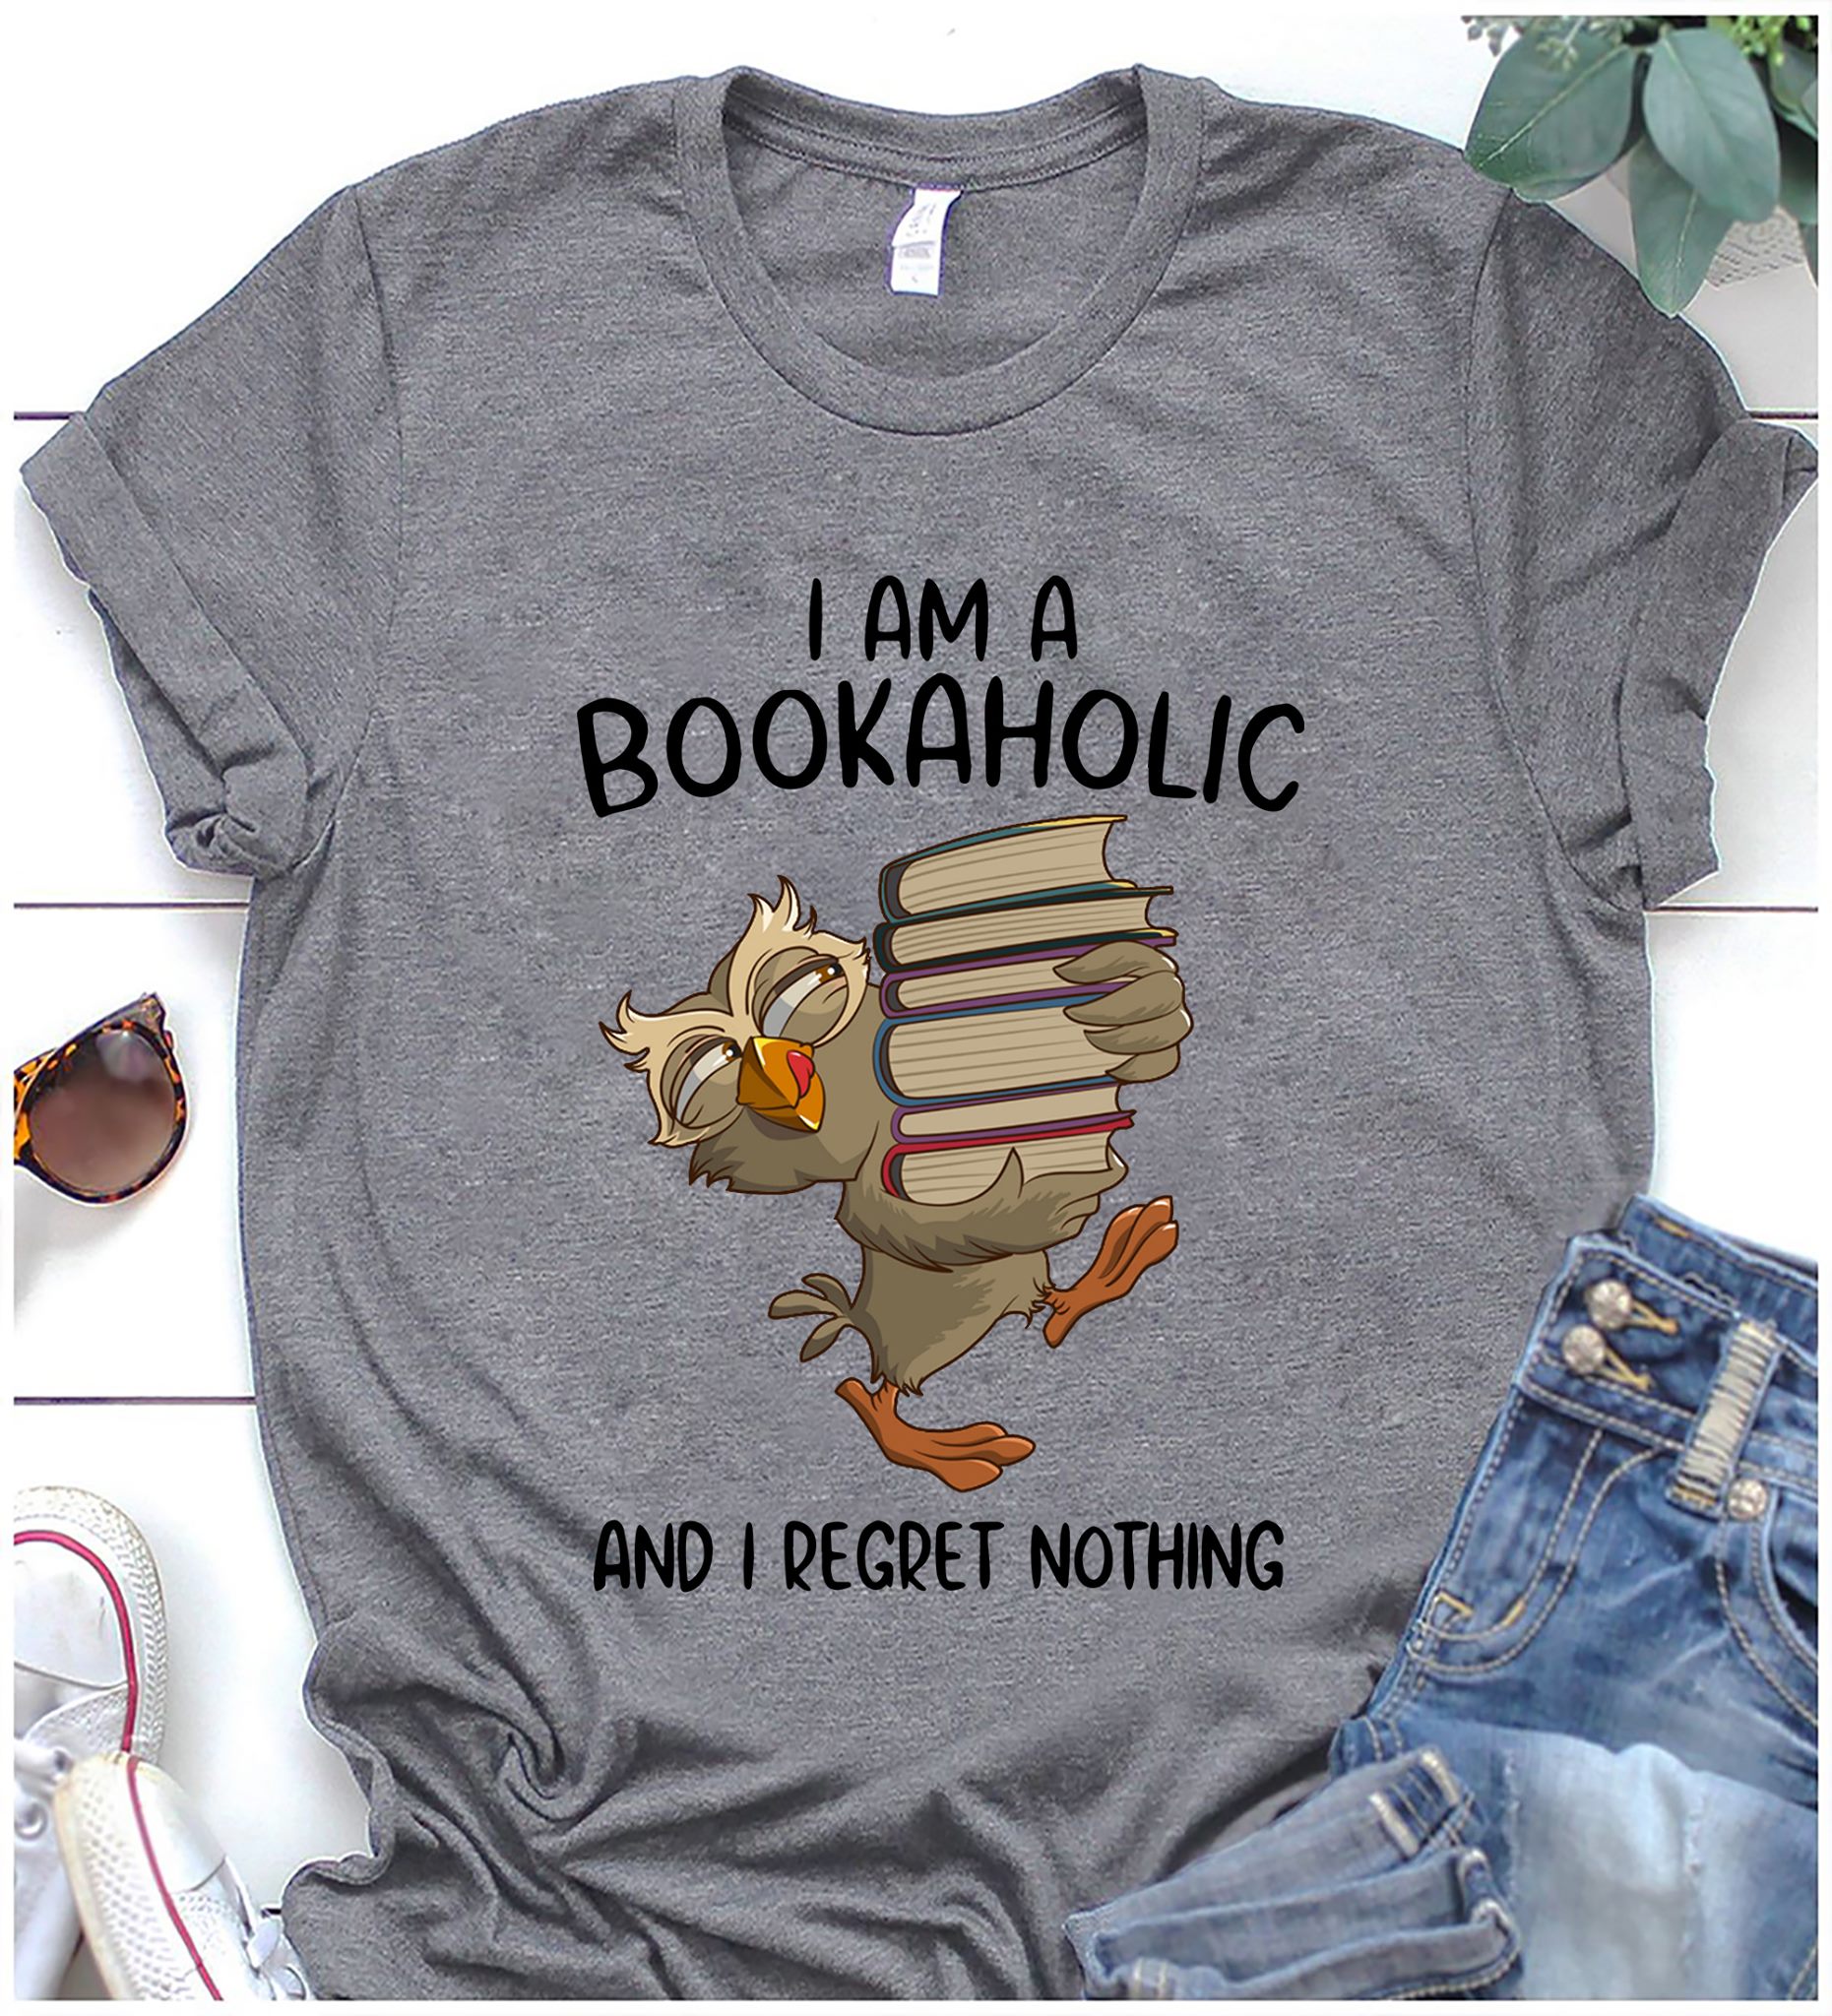 I am a bookaholic and I regret nothing - Owl love books